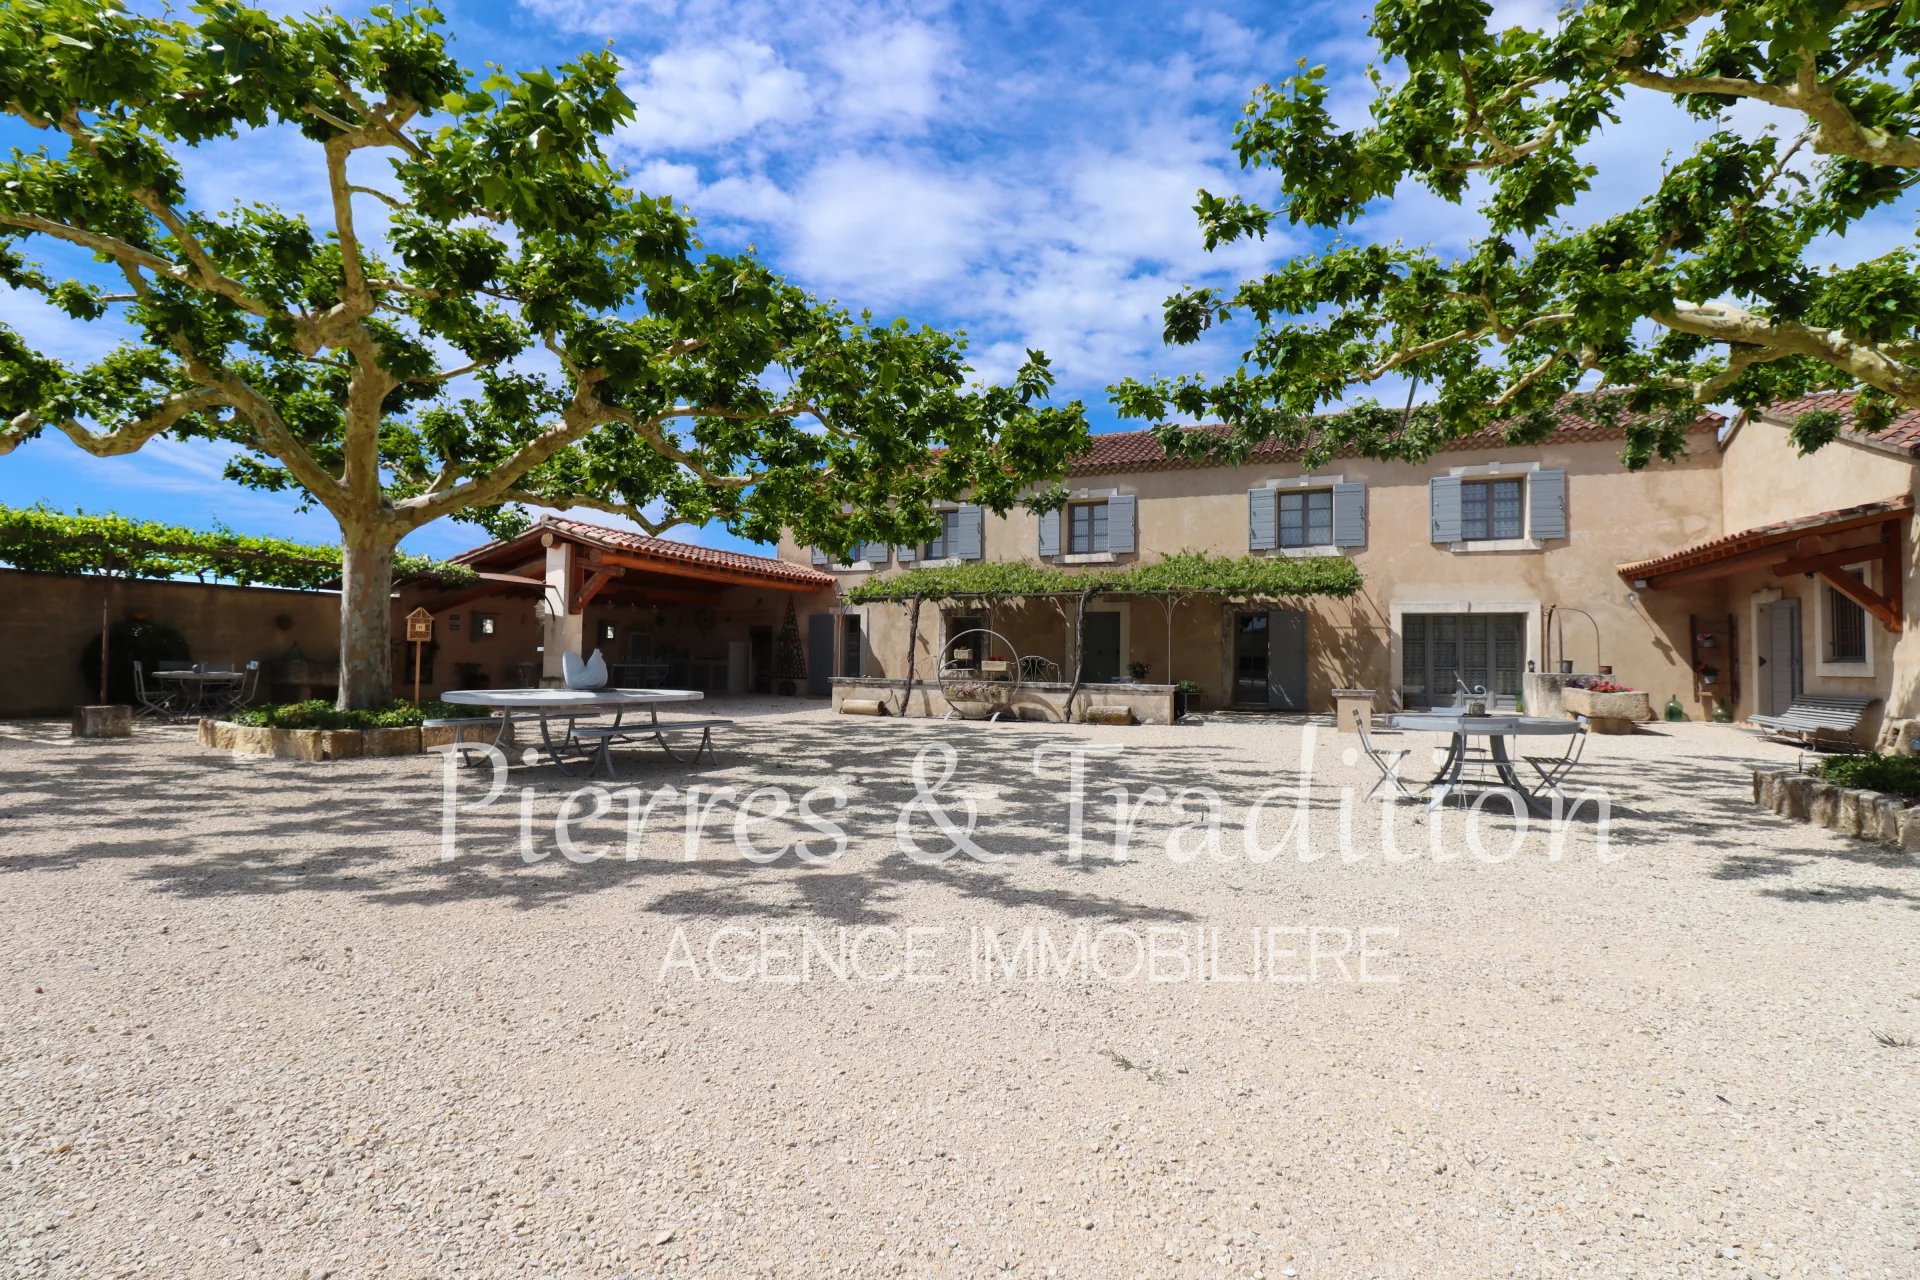 Lagnes, magnificent property of 260 m² of living space facing the Luberon